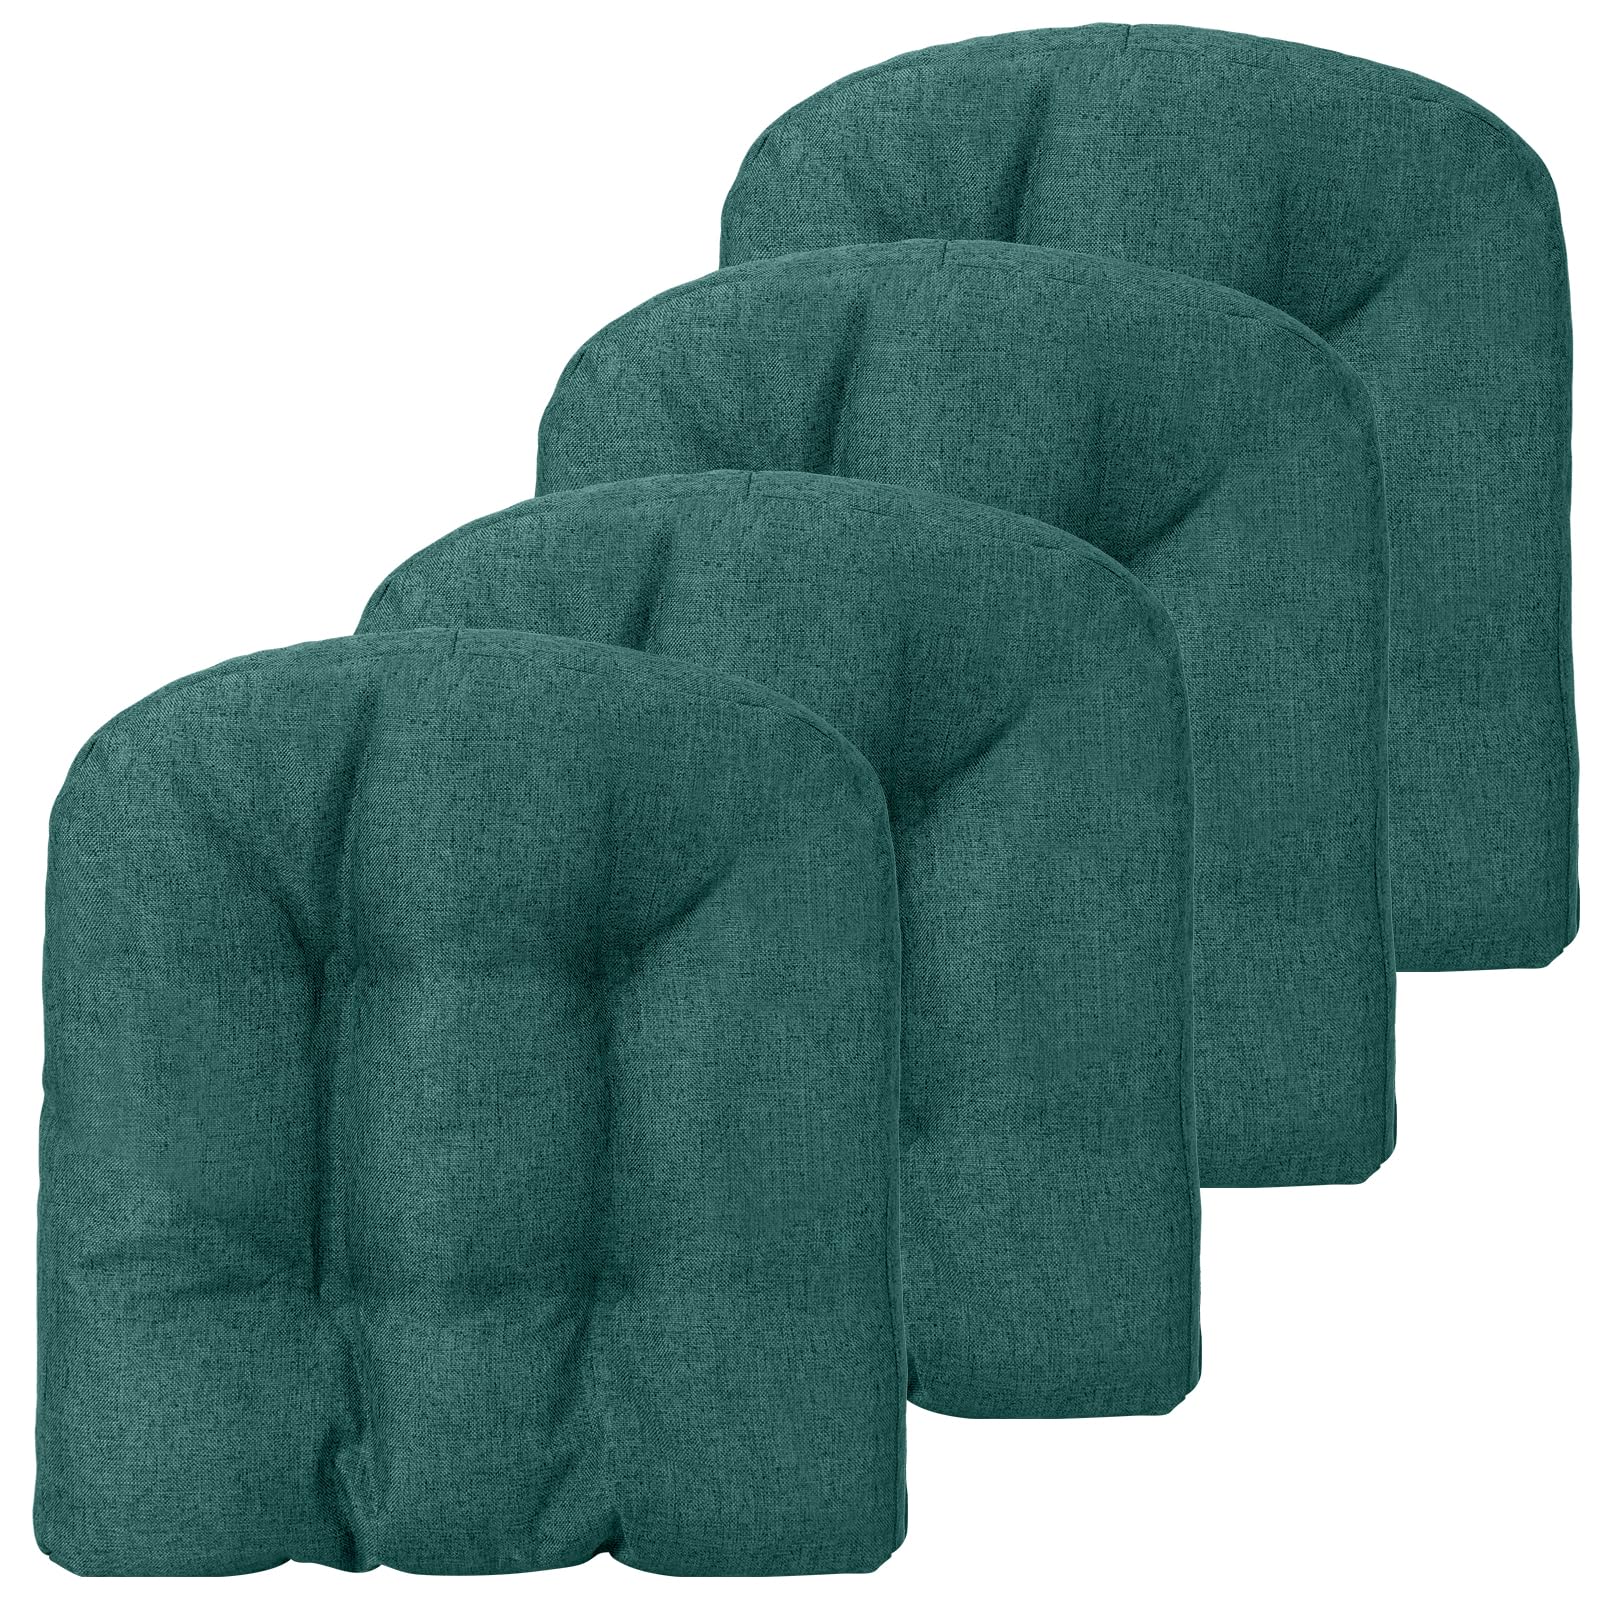 Tangkula Chair Cushions for Dining Chairs 4 Pack, 17.5” x 17”U-Shaped Chair Pads with Polyester Cover